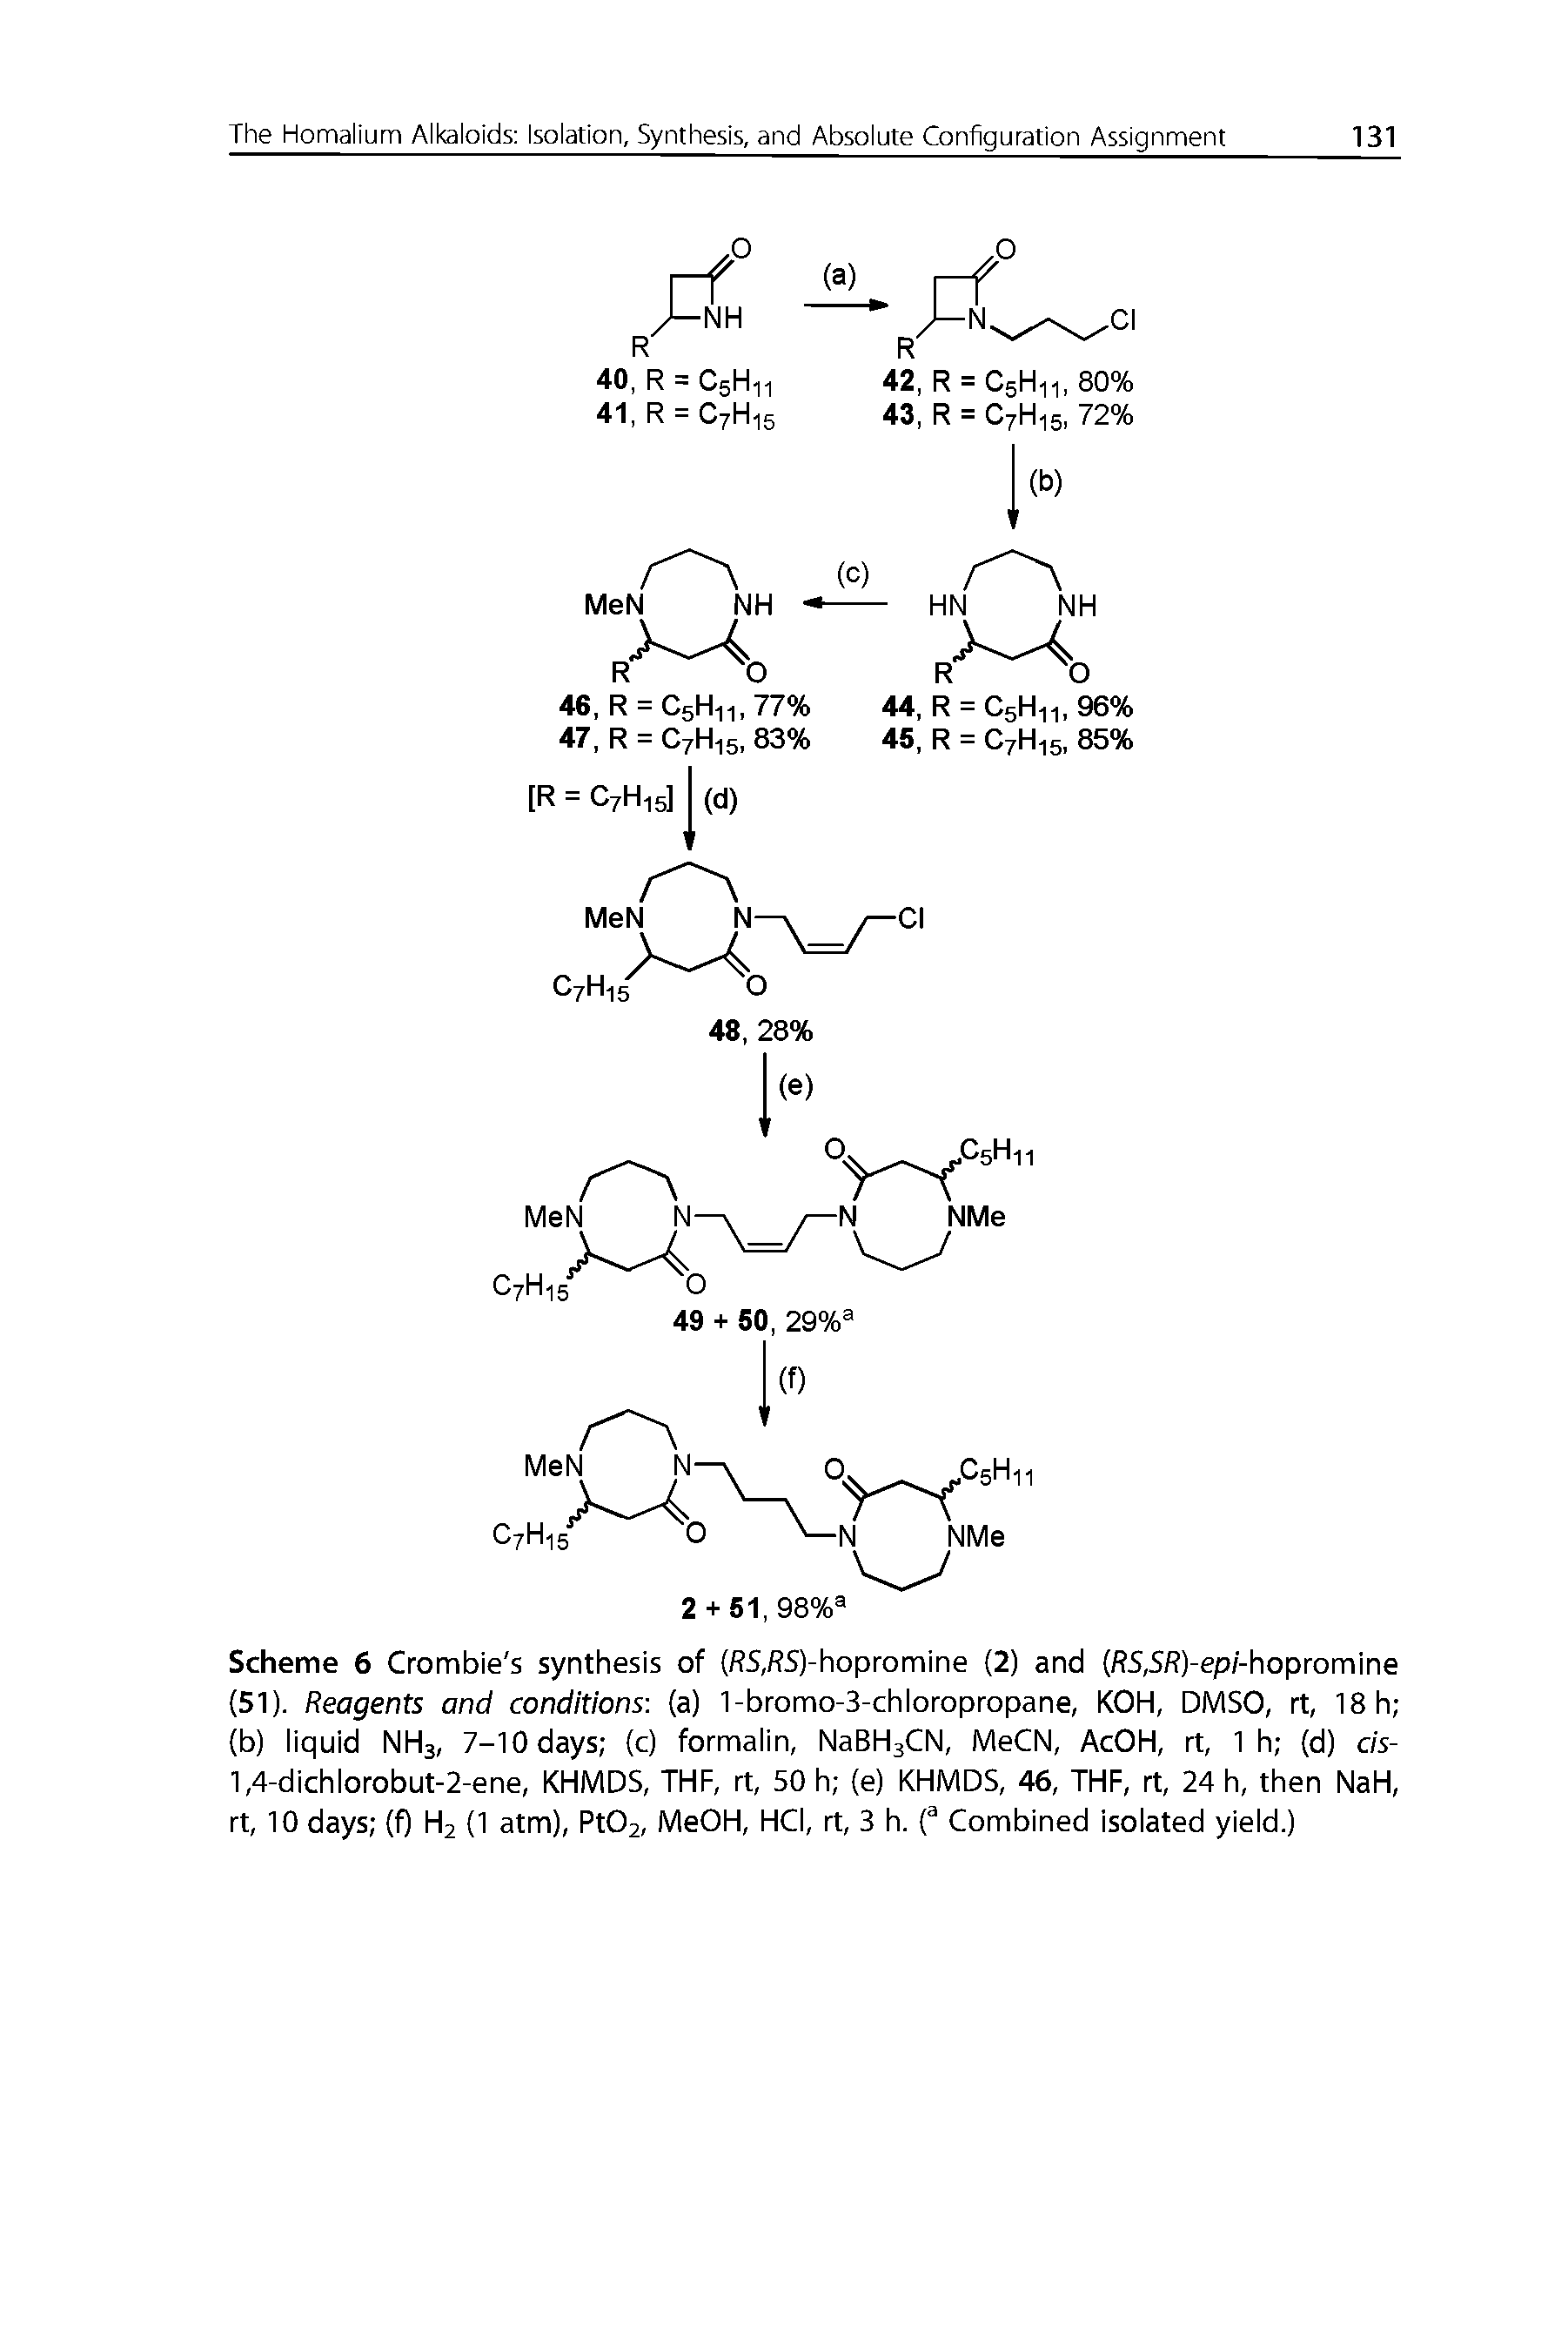 Scheme 6 Crombie s synthesis of (/ S,/ S)-hopromine (2) and / S,S/ )-ep/-hopromine (51). Reagents and conditions (a) 1-bromo-3-chloropropane, KOH, DMSO, rt, 18h (b) liquid NH3, 7-10 days (c) formalin, NaBHaCN, MeCN, AcOH, rt, 1 h (d) cis-1,4-dichlorobut-2-ene, KHMDS, THF, rt, 50 h (e) KHMDS, 46, THF, rt, 24 h, then NaH, rt, 10 days (f) H2 (1 atm), Pt02, MeOH, HCI, rt, 3 h. f Combined isolated yield.)...